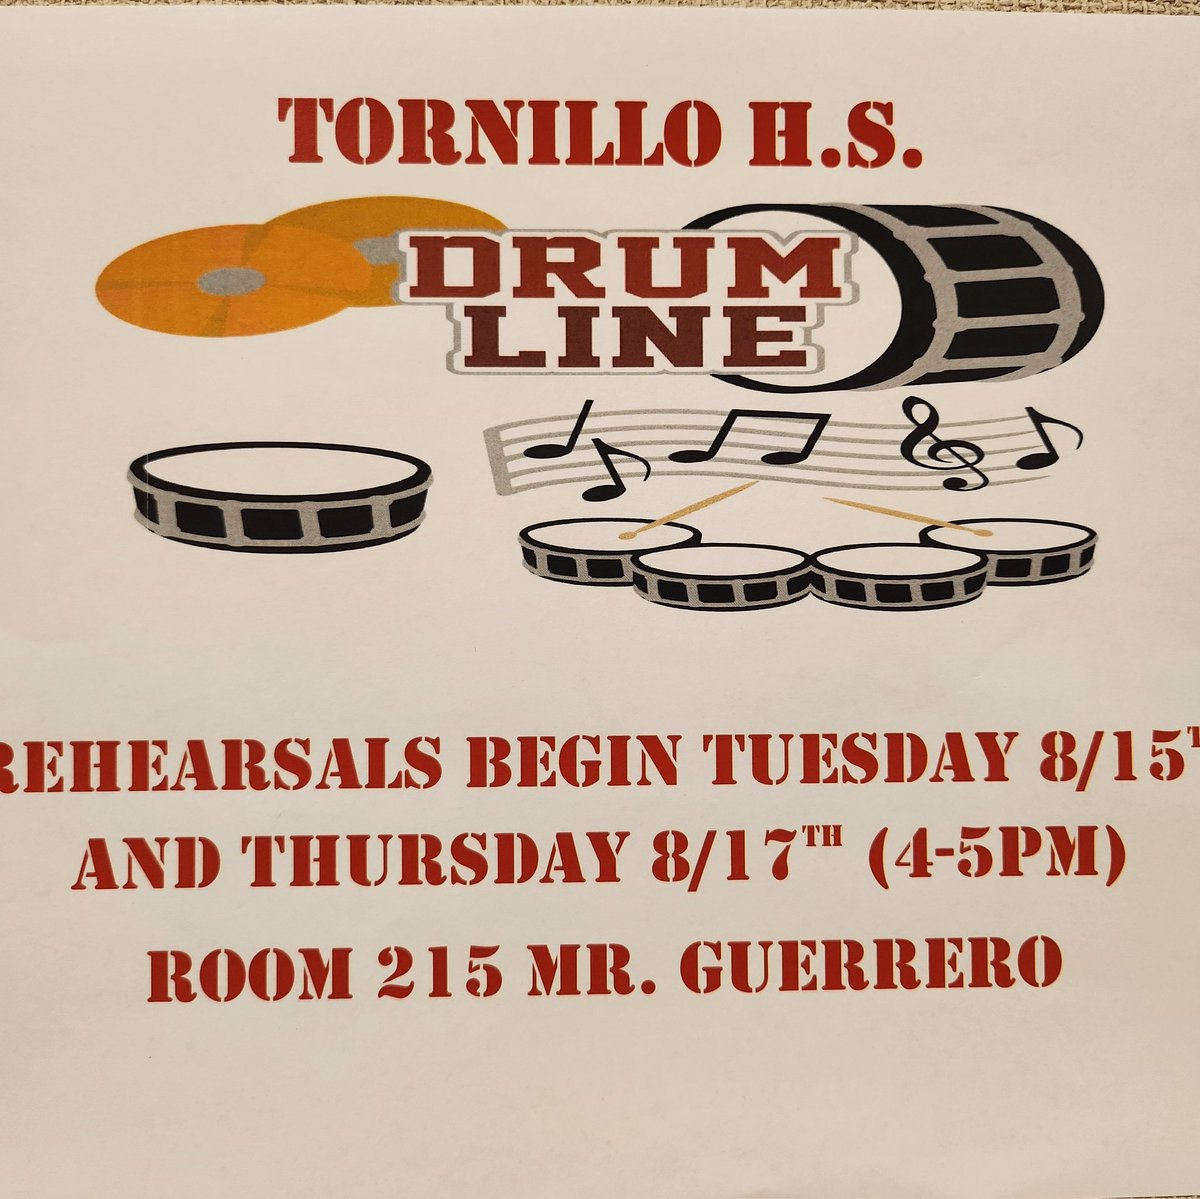 It's About To Go Down!!! Please spread the word to any Tornillo H.S. students interested! #YTISDProud #WeBeforeMe